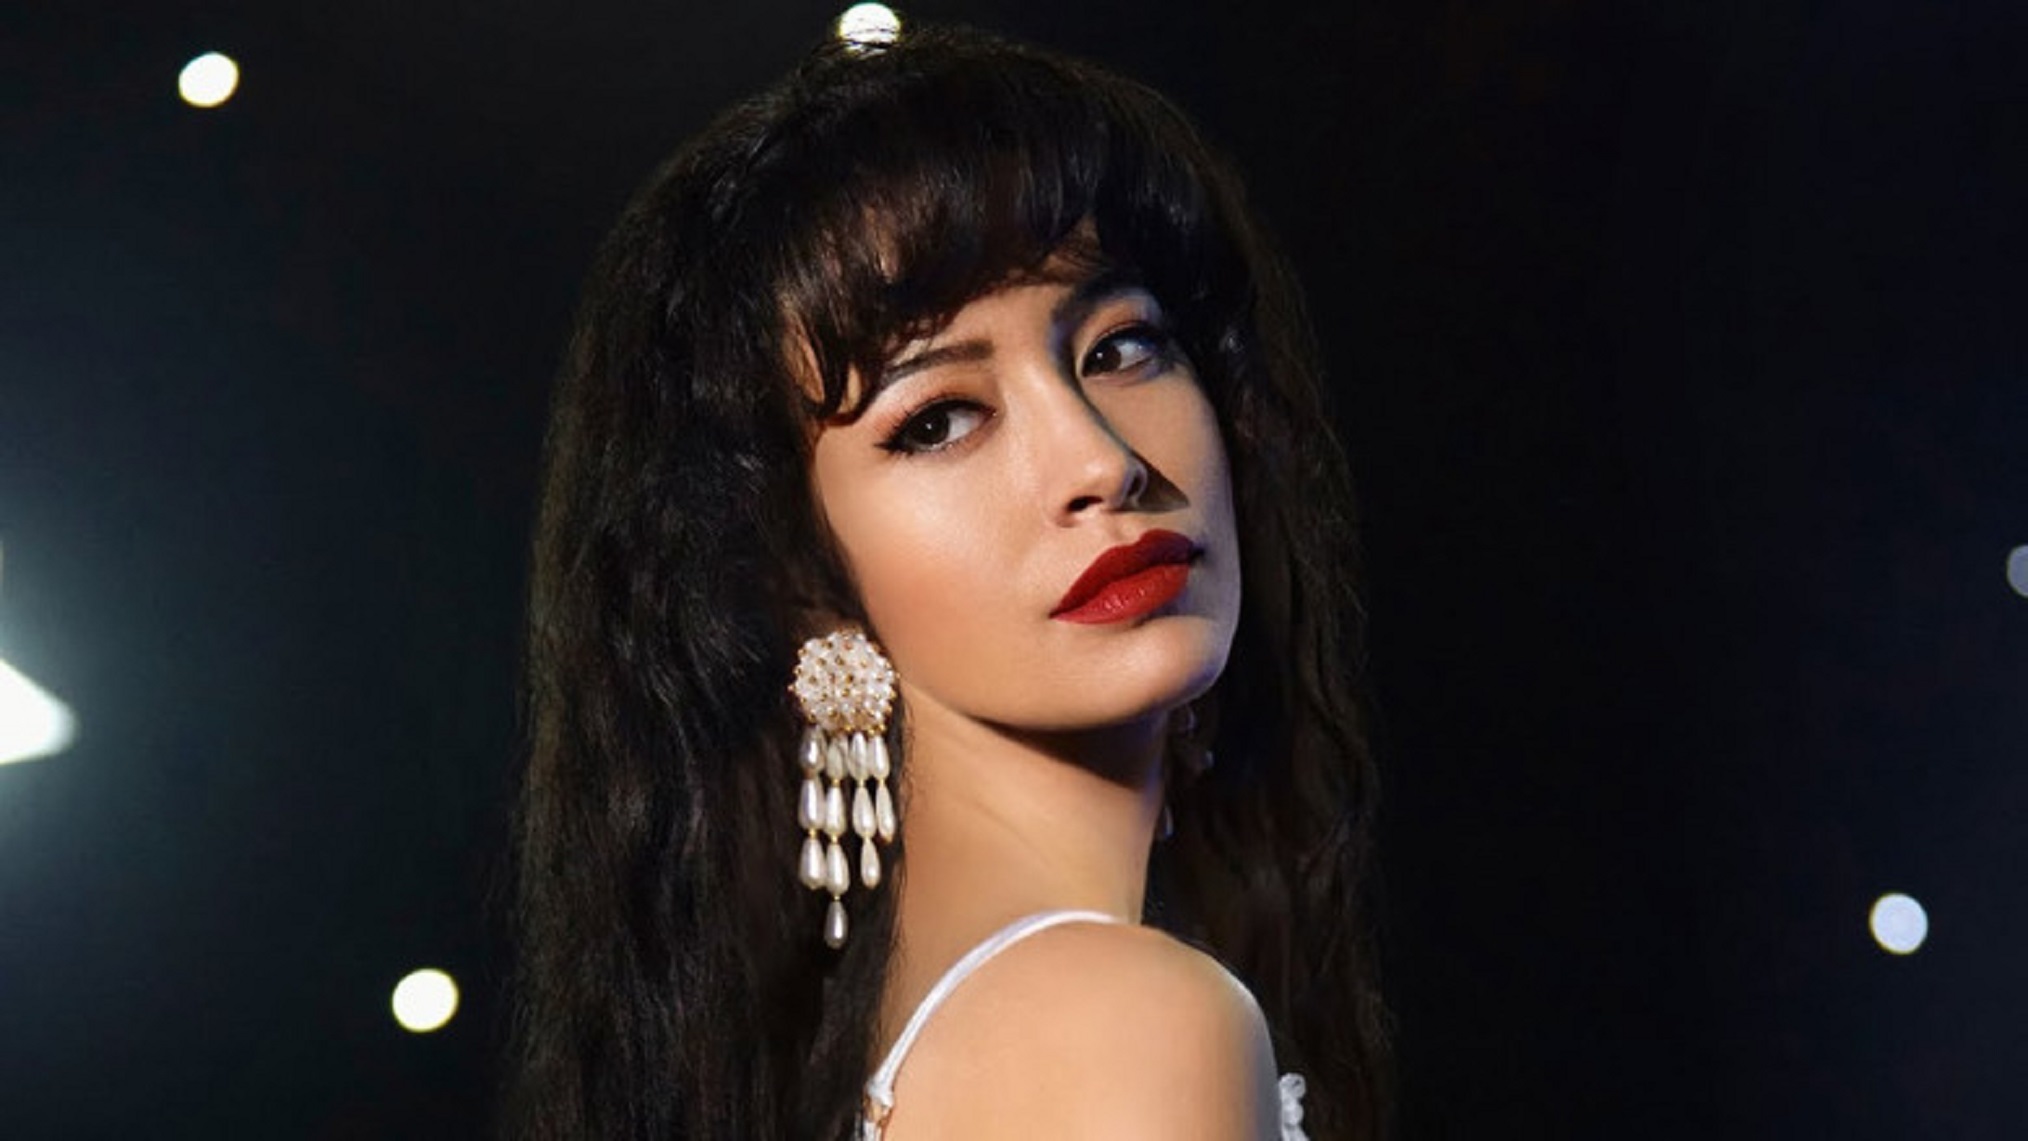 Watch: Trailer For New Netflix Series On The Life of Late Selena Quintanilla